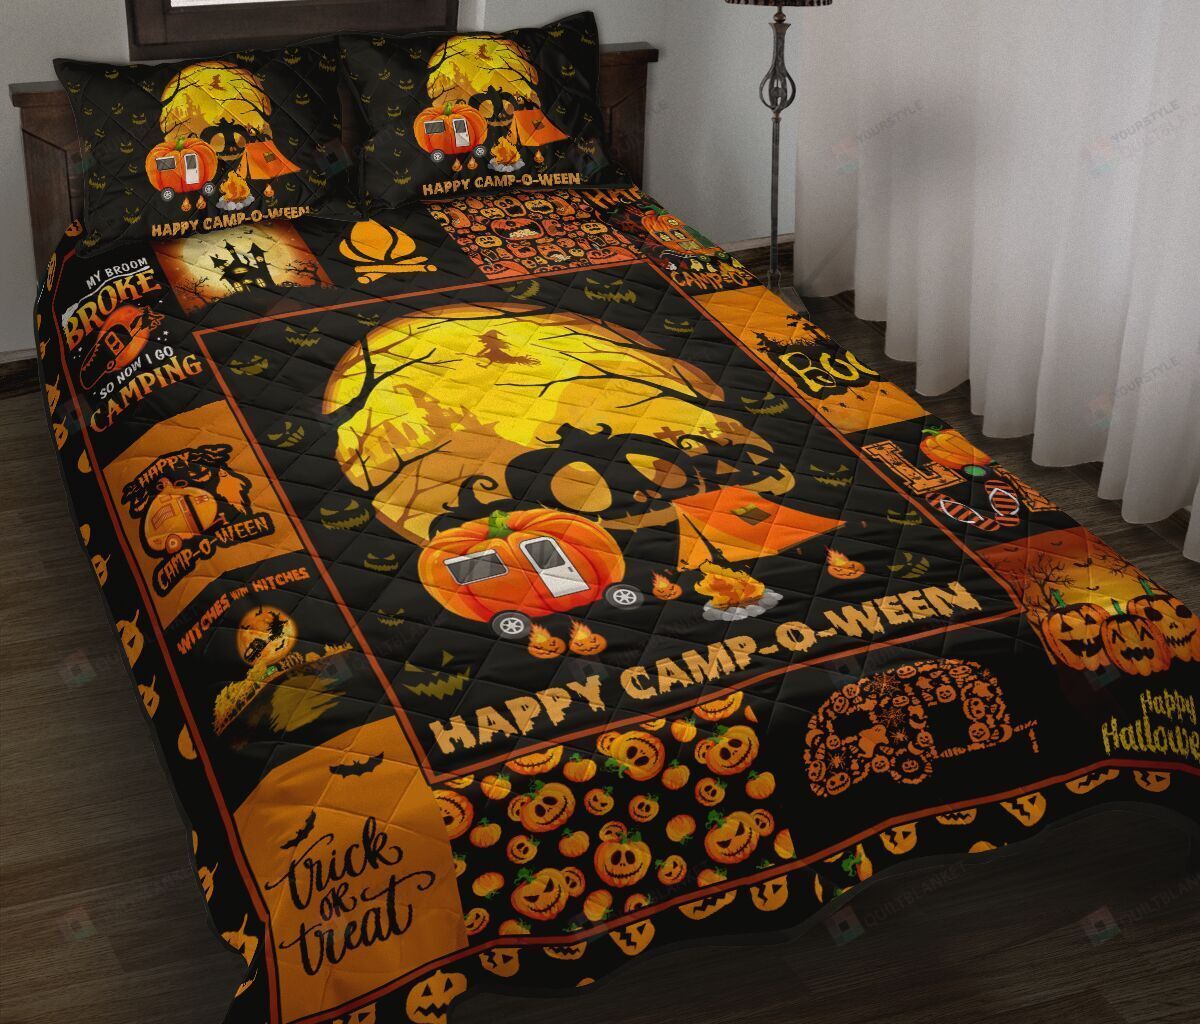 Camping Happy Campoween Quilt Bedding Set